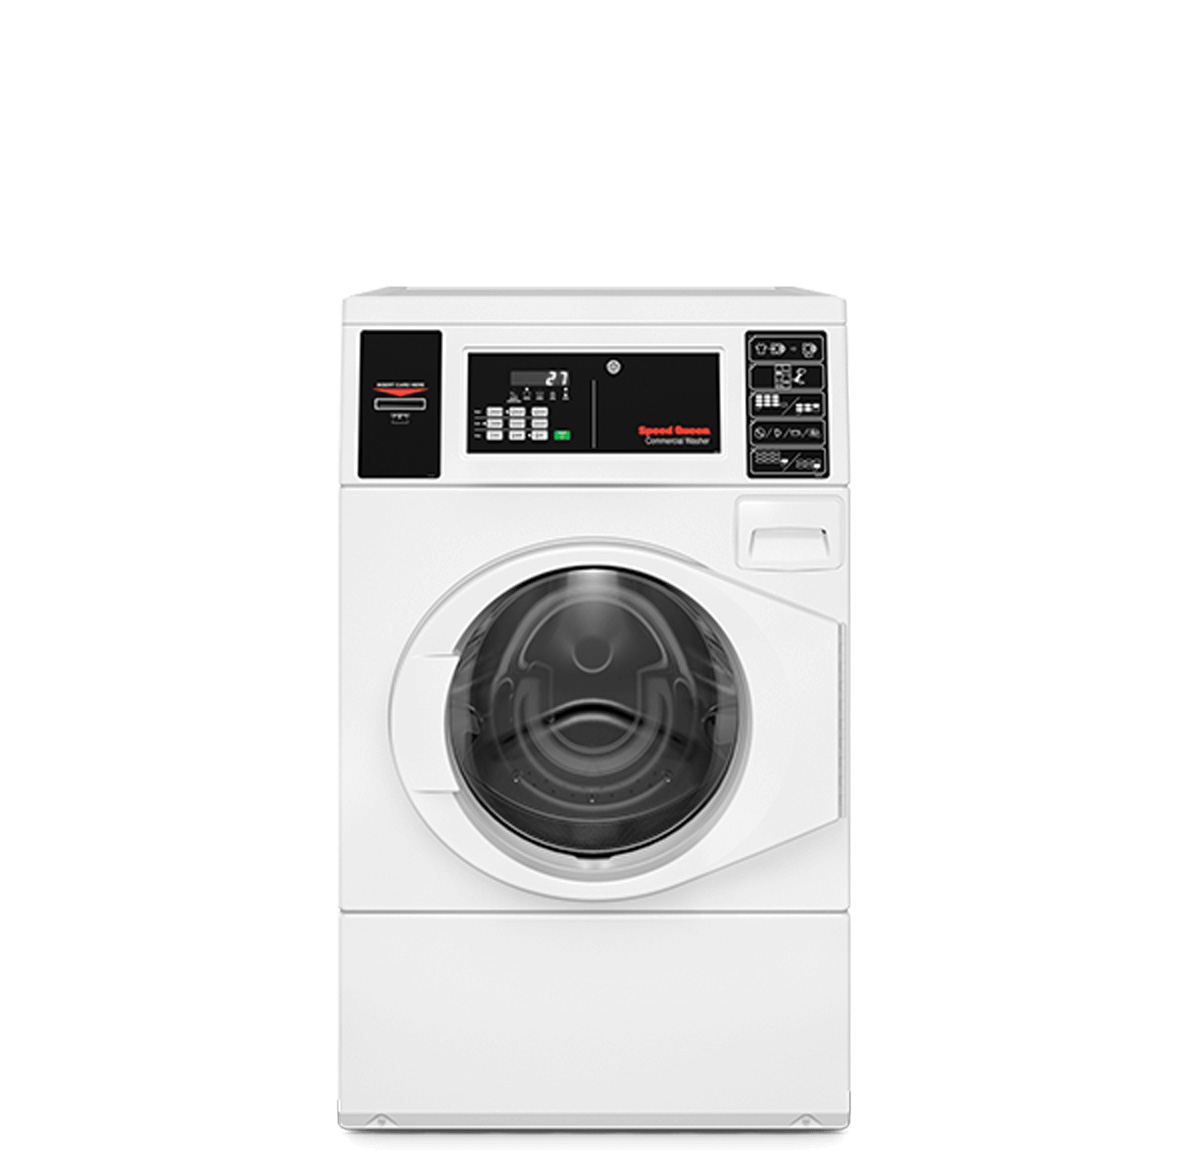 Speed Queen Commercial Top Load Washer 1PH 120V 60HZ SWTT21WN (Refurbished)